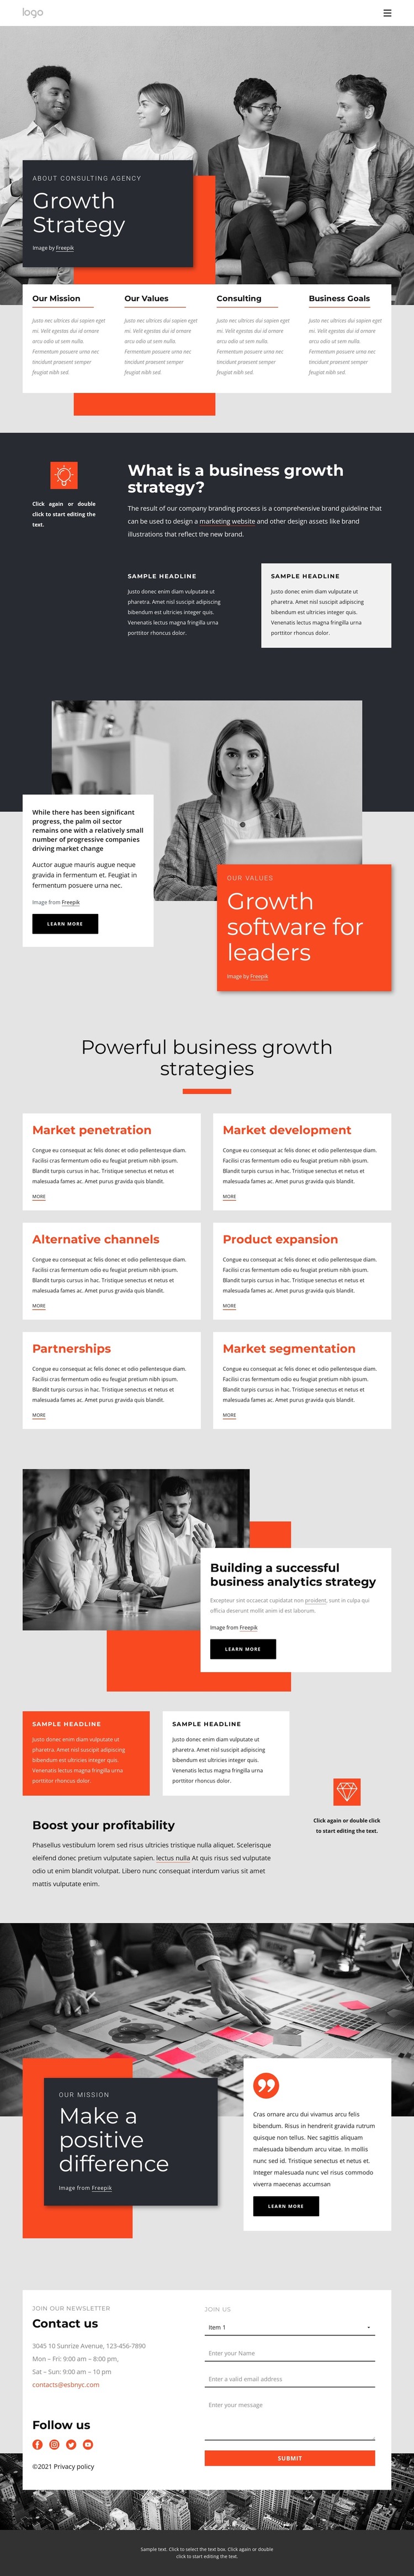 Growth strategy consultants WordPress Theme